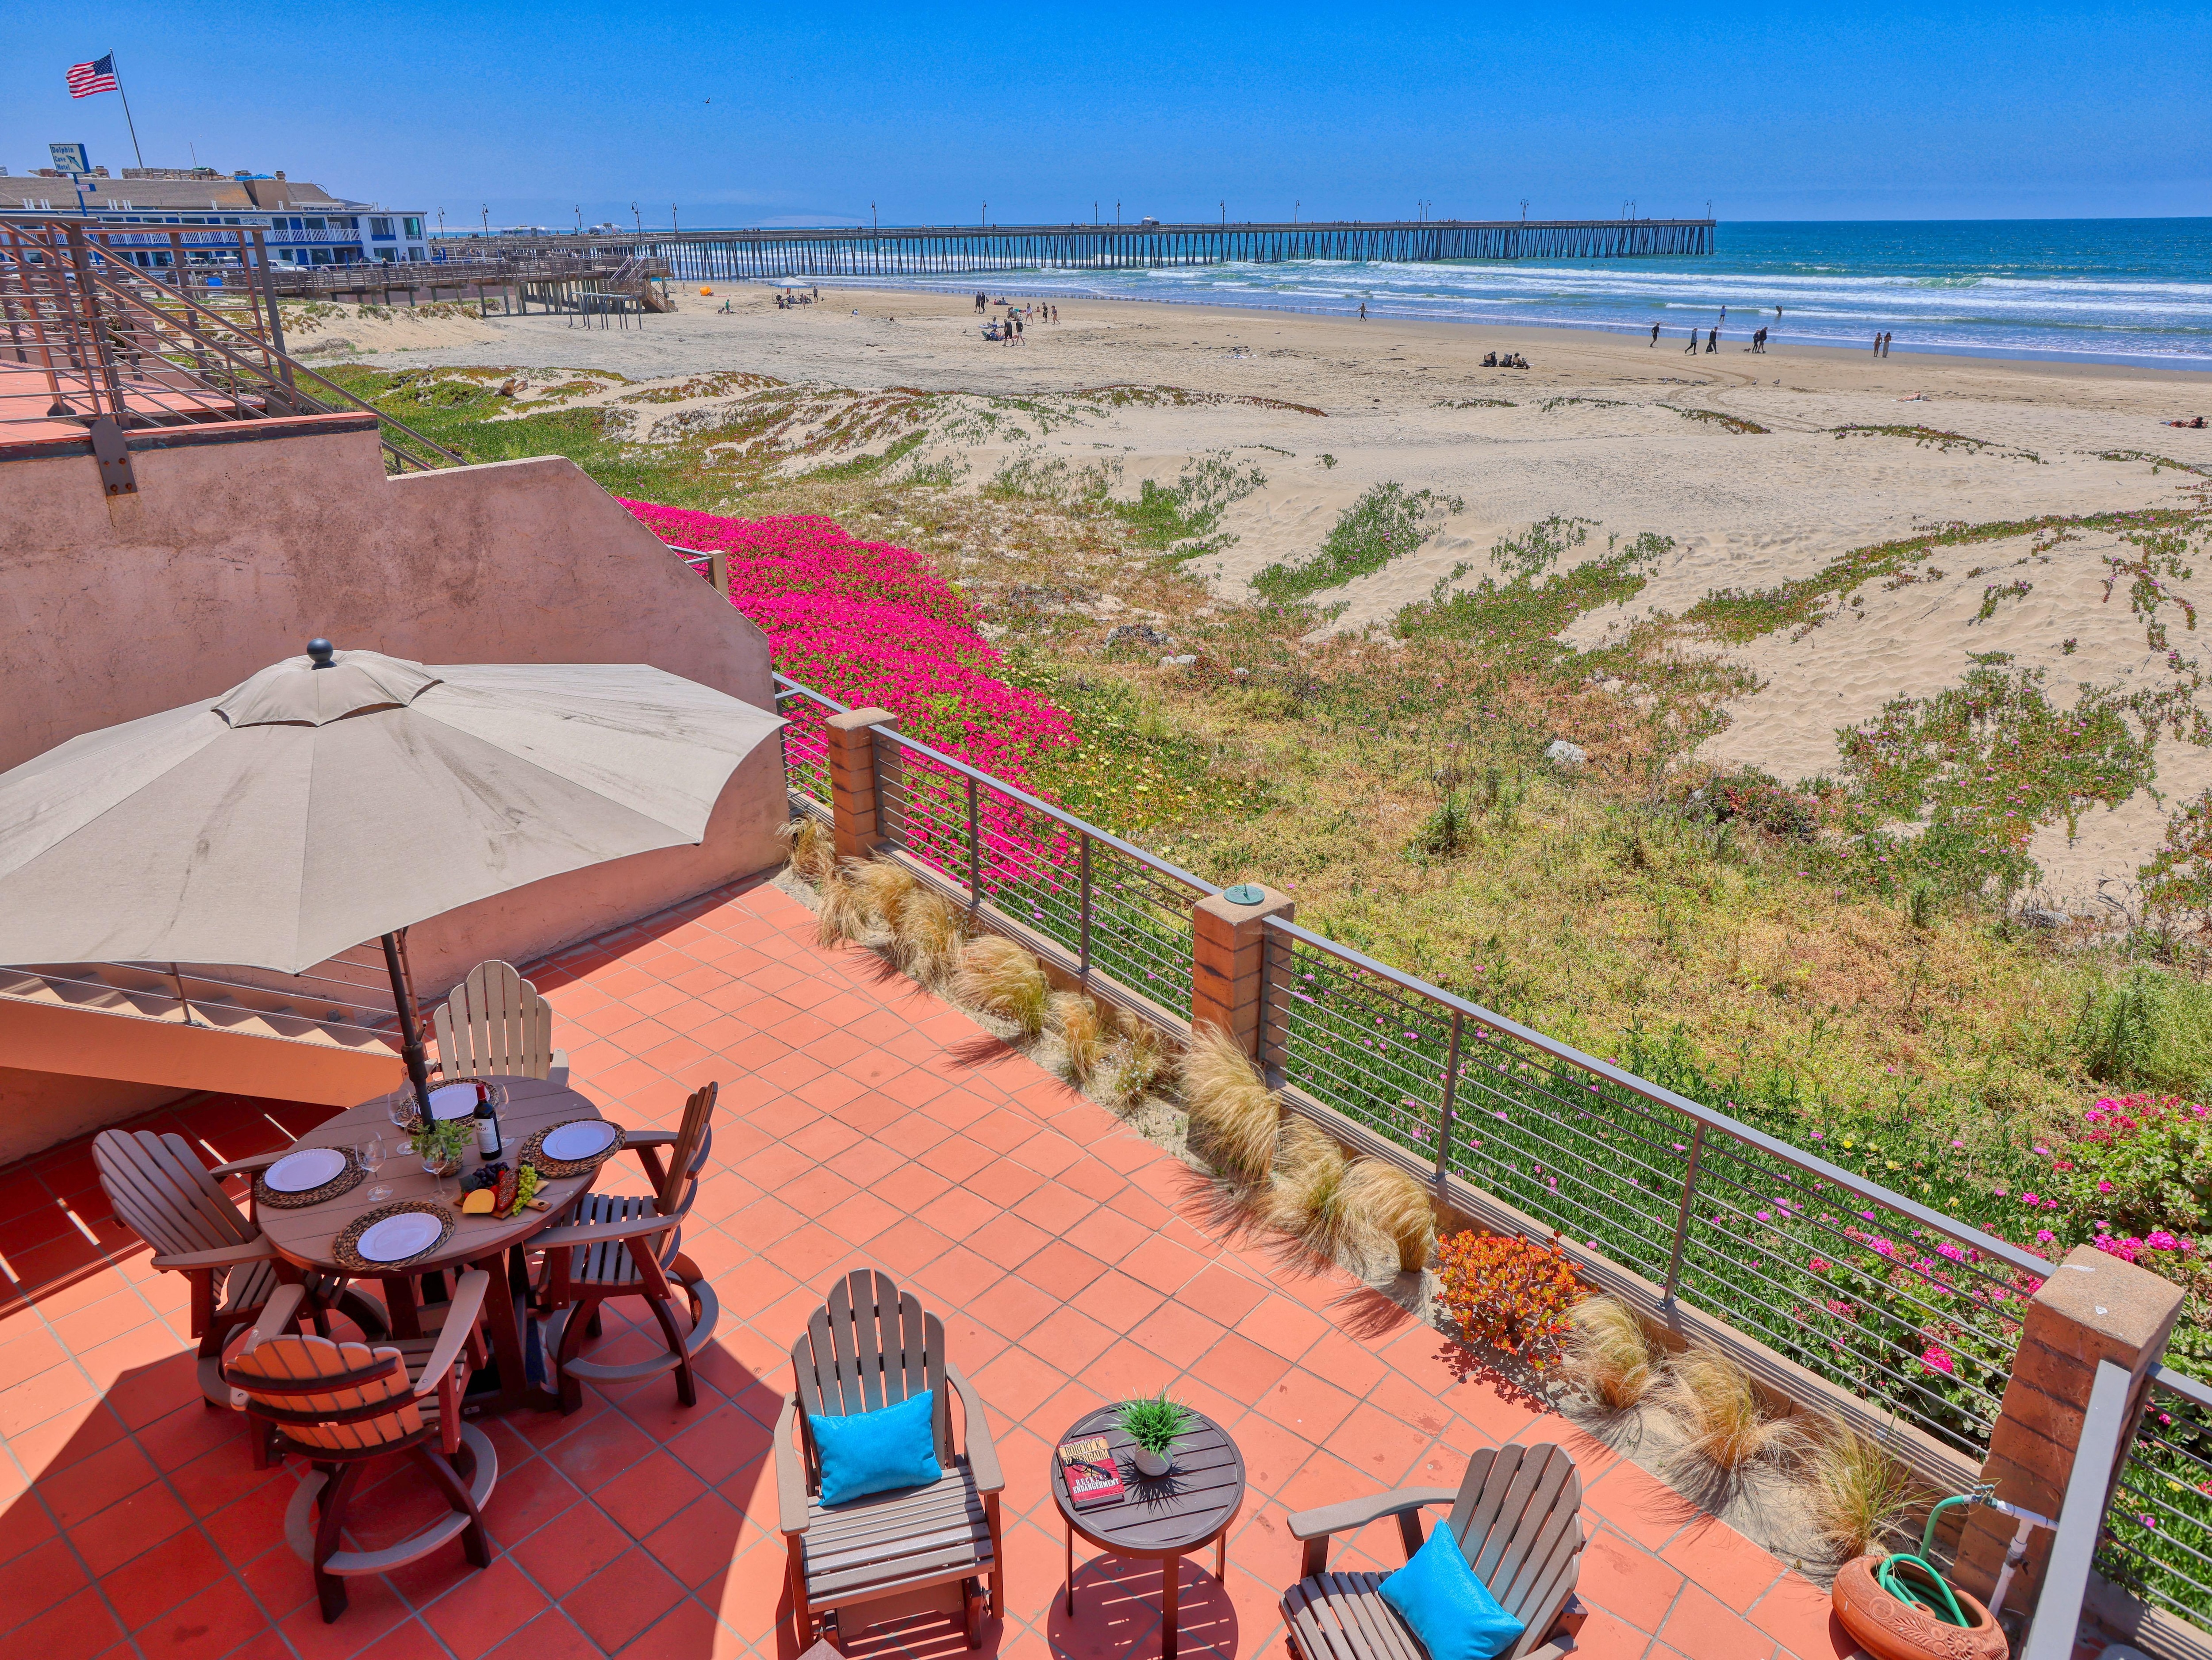 Your Oceanfront Oasis awaits. Step onto your private beachfront patio, perfect for gathering with family and friends around the fire table, whipping up delicious treats, and soaking in the Pismo Beach vibe.